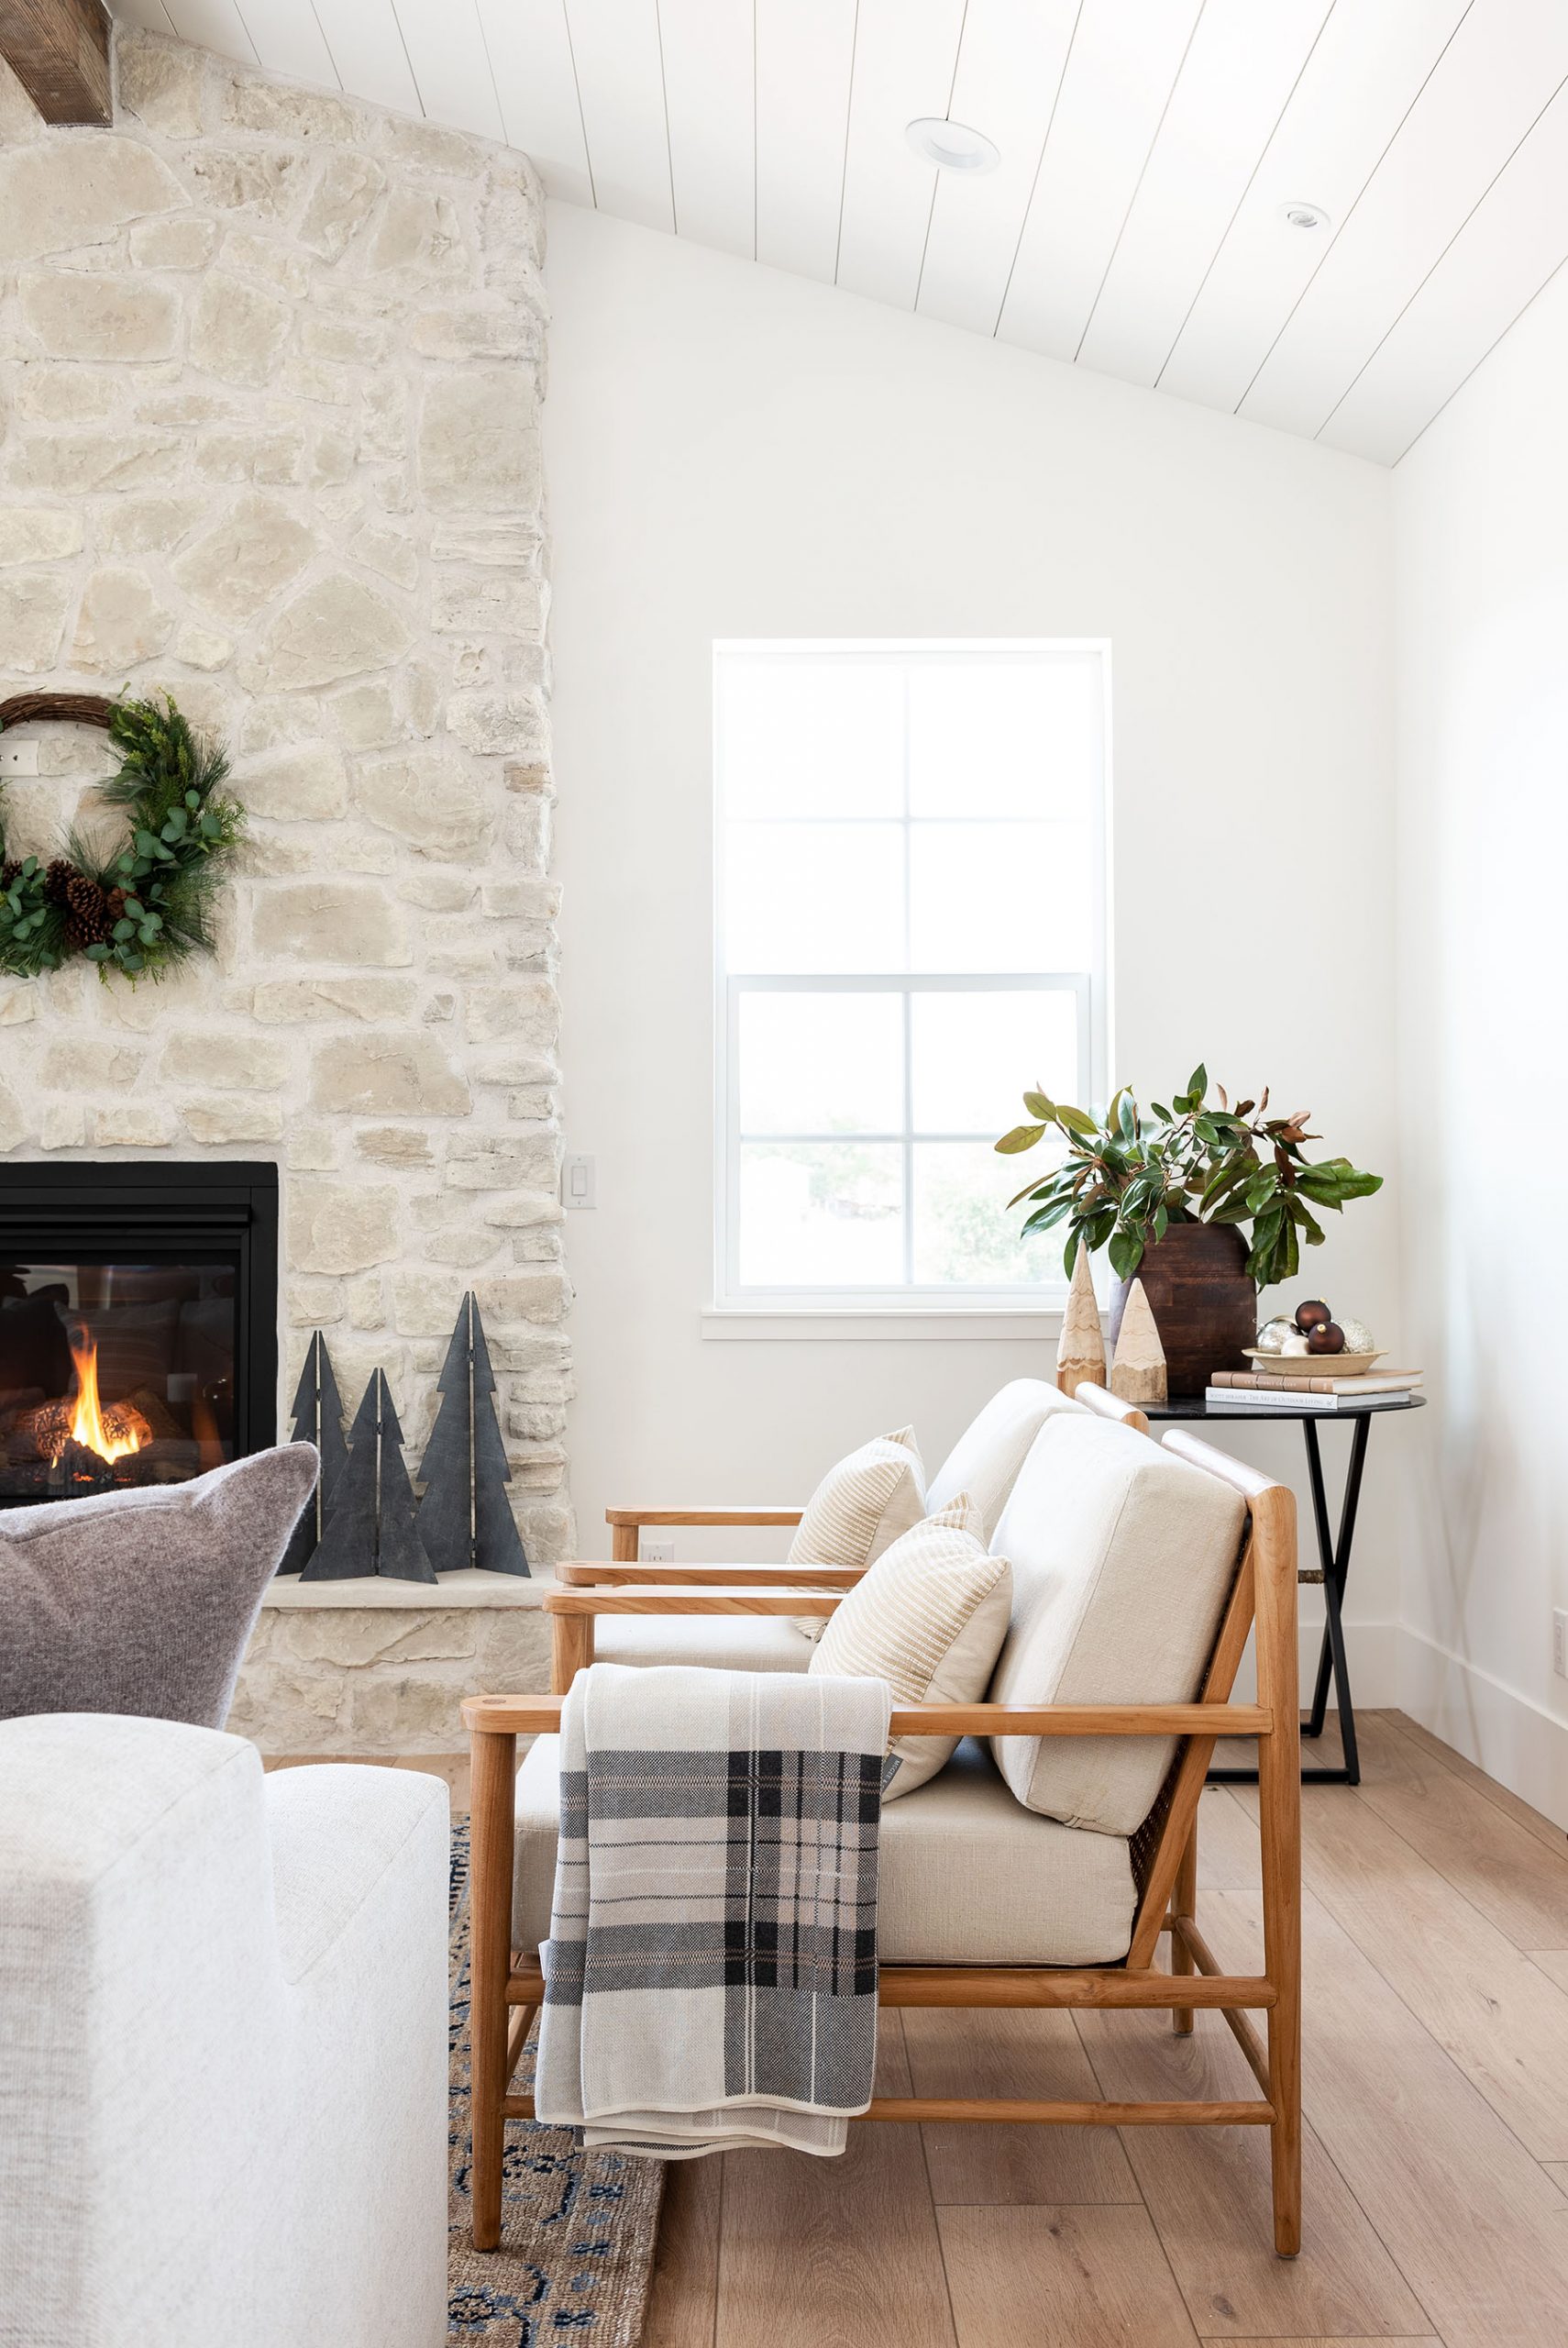 Proof that Sometimes Less is More when it Comes to Christmas Decor | lark & linen